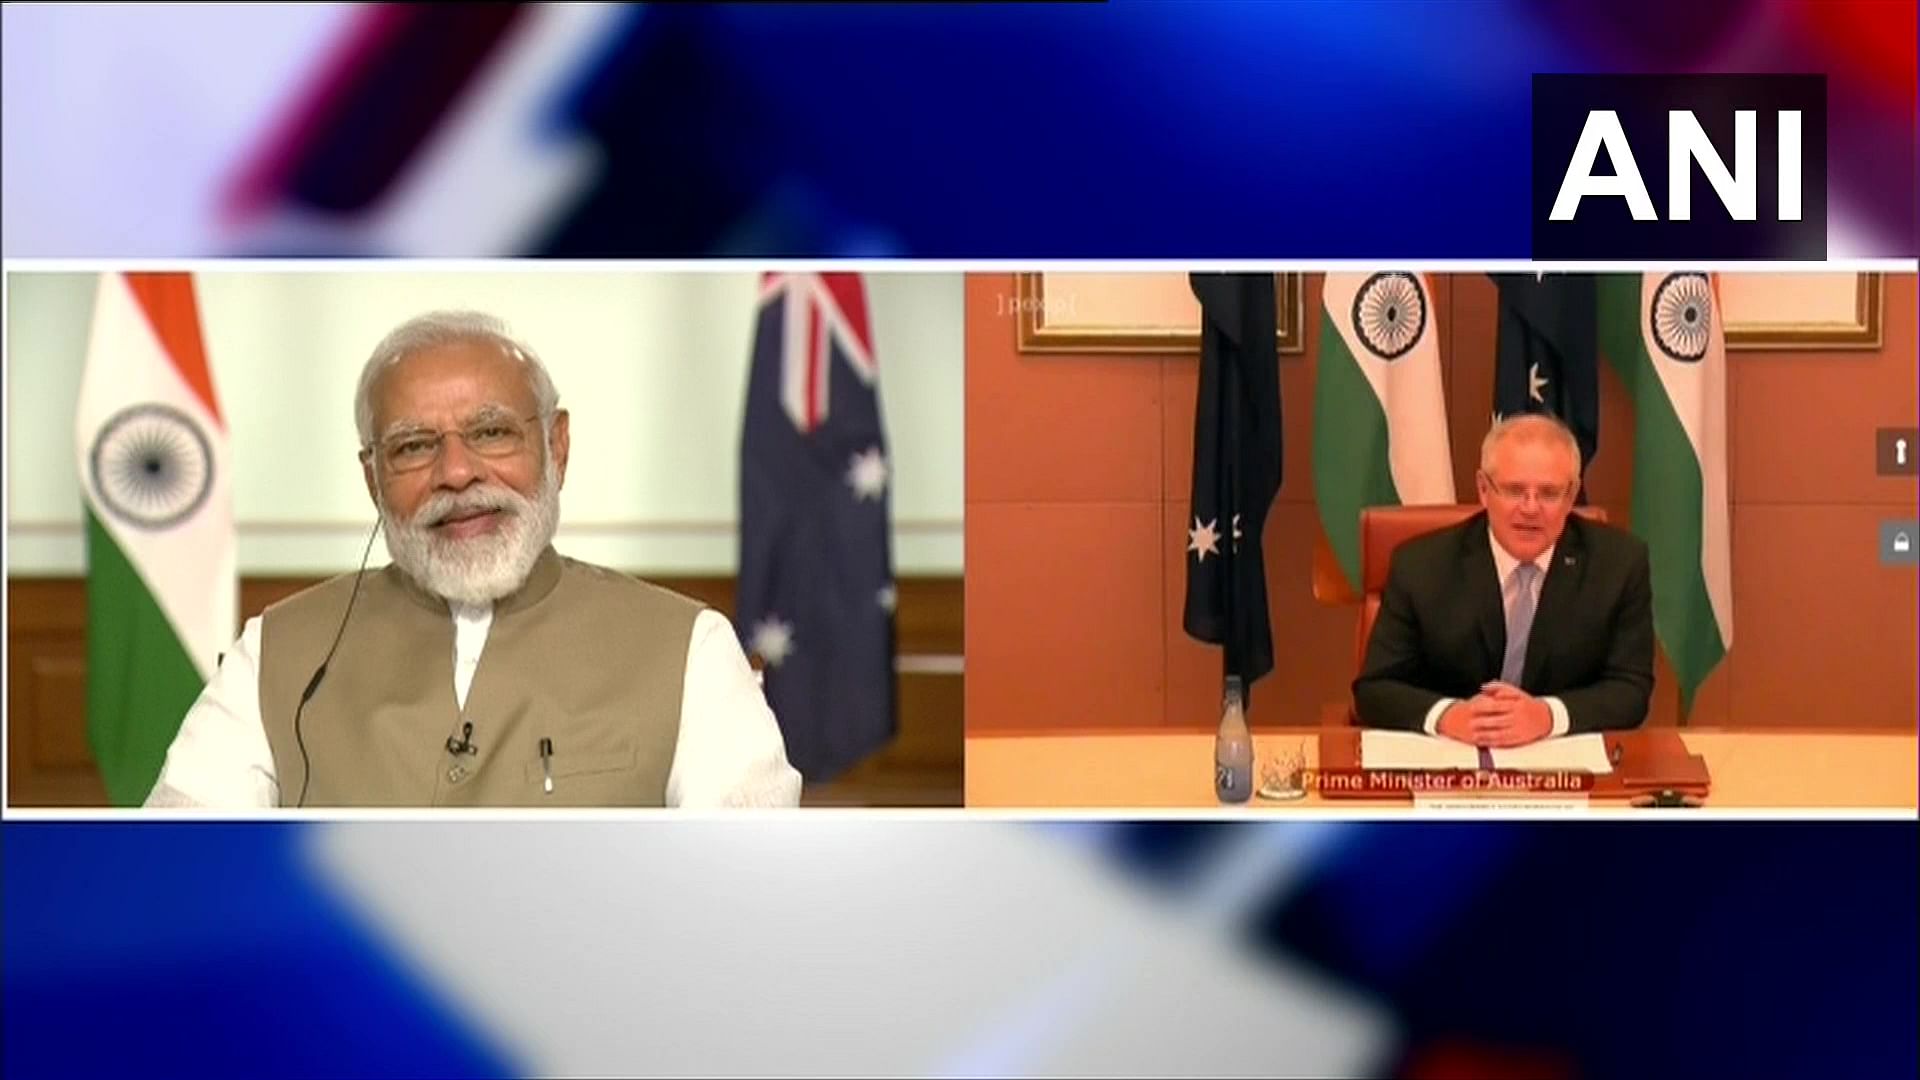 This is the first time that the Prime Minister of India will hold a “bilateral” online summit with a foreign leader.